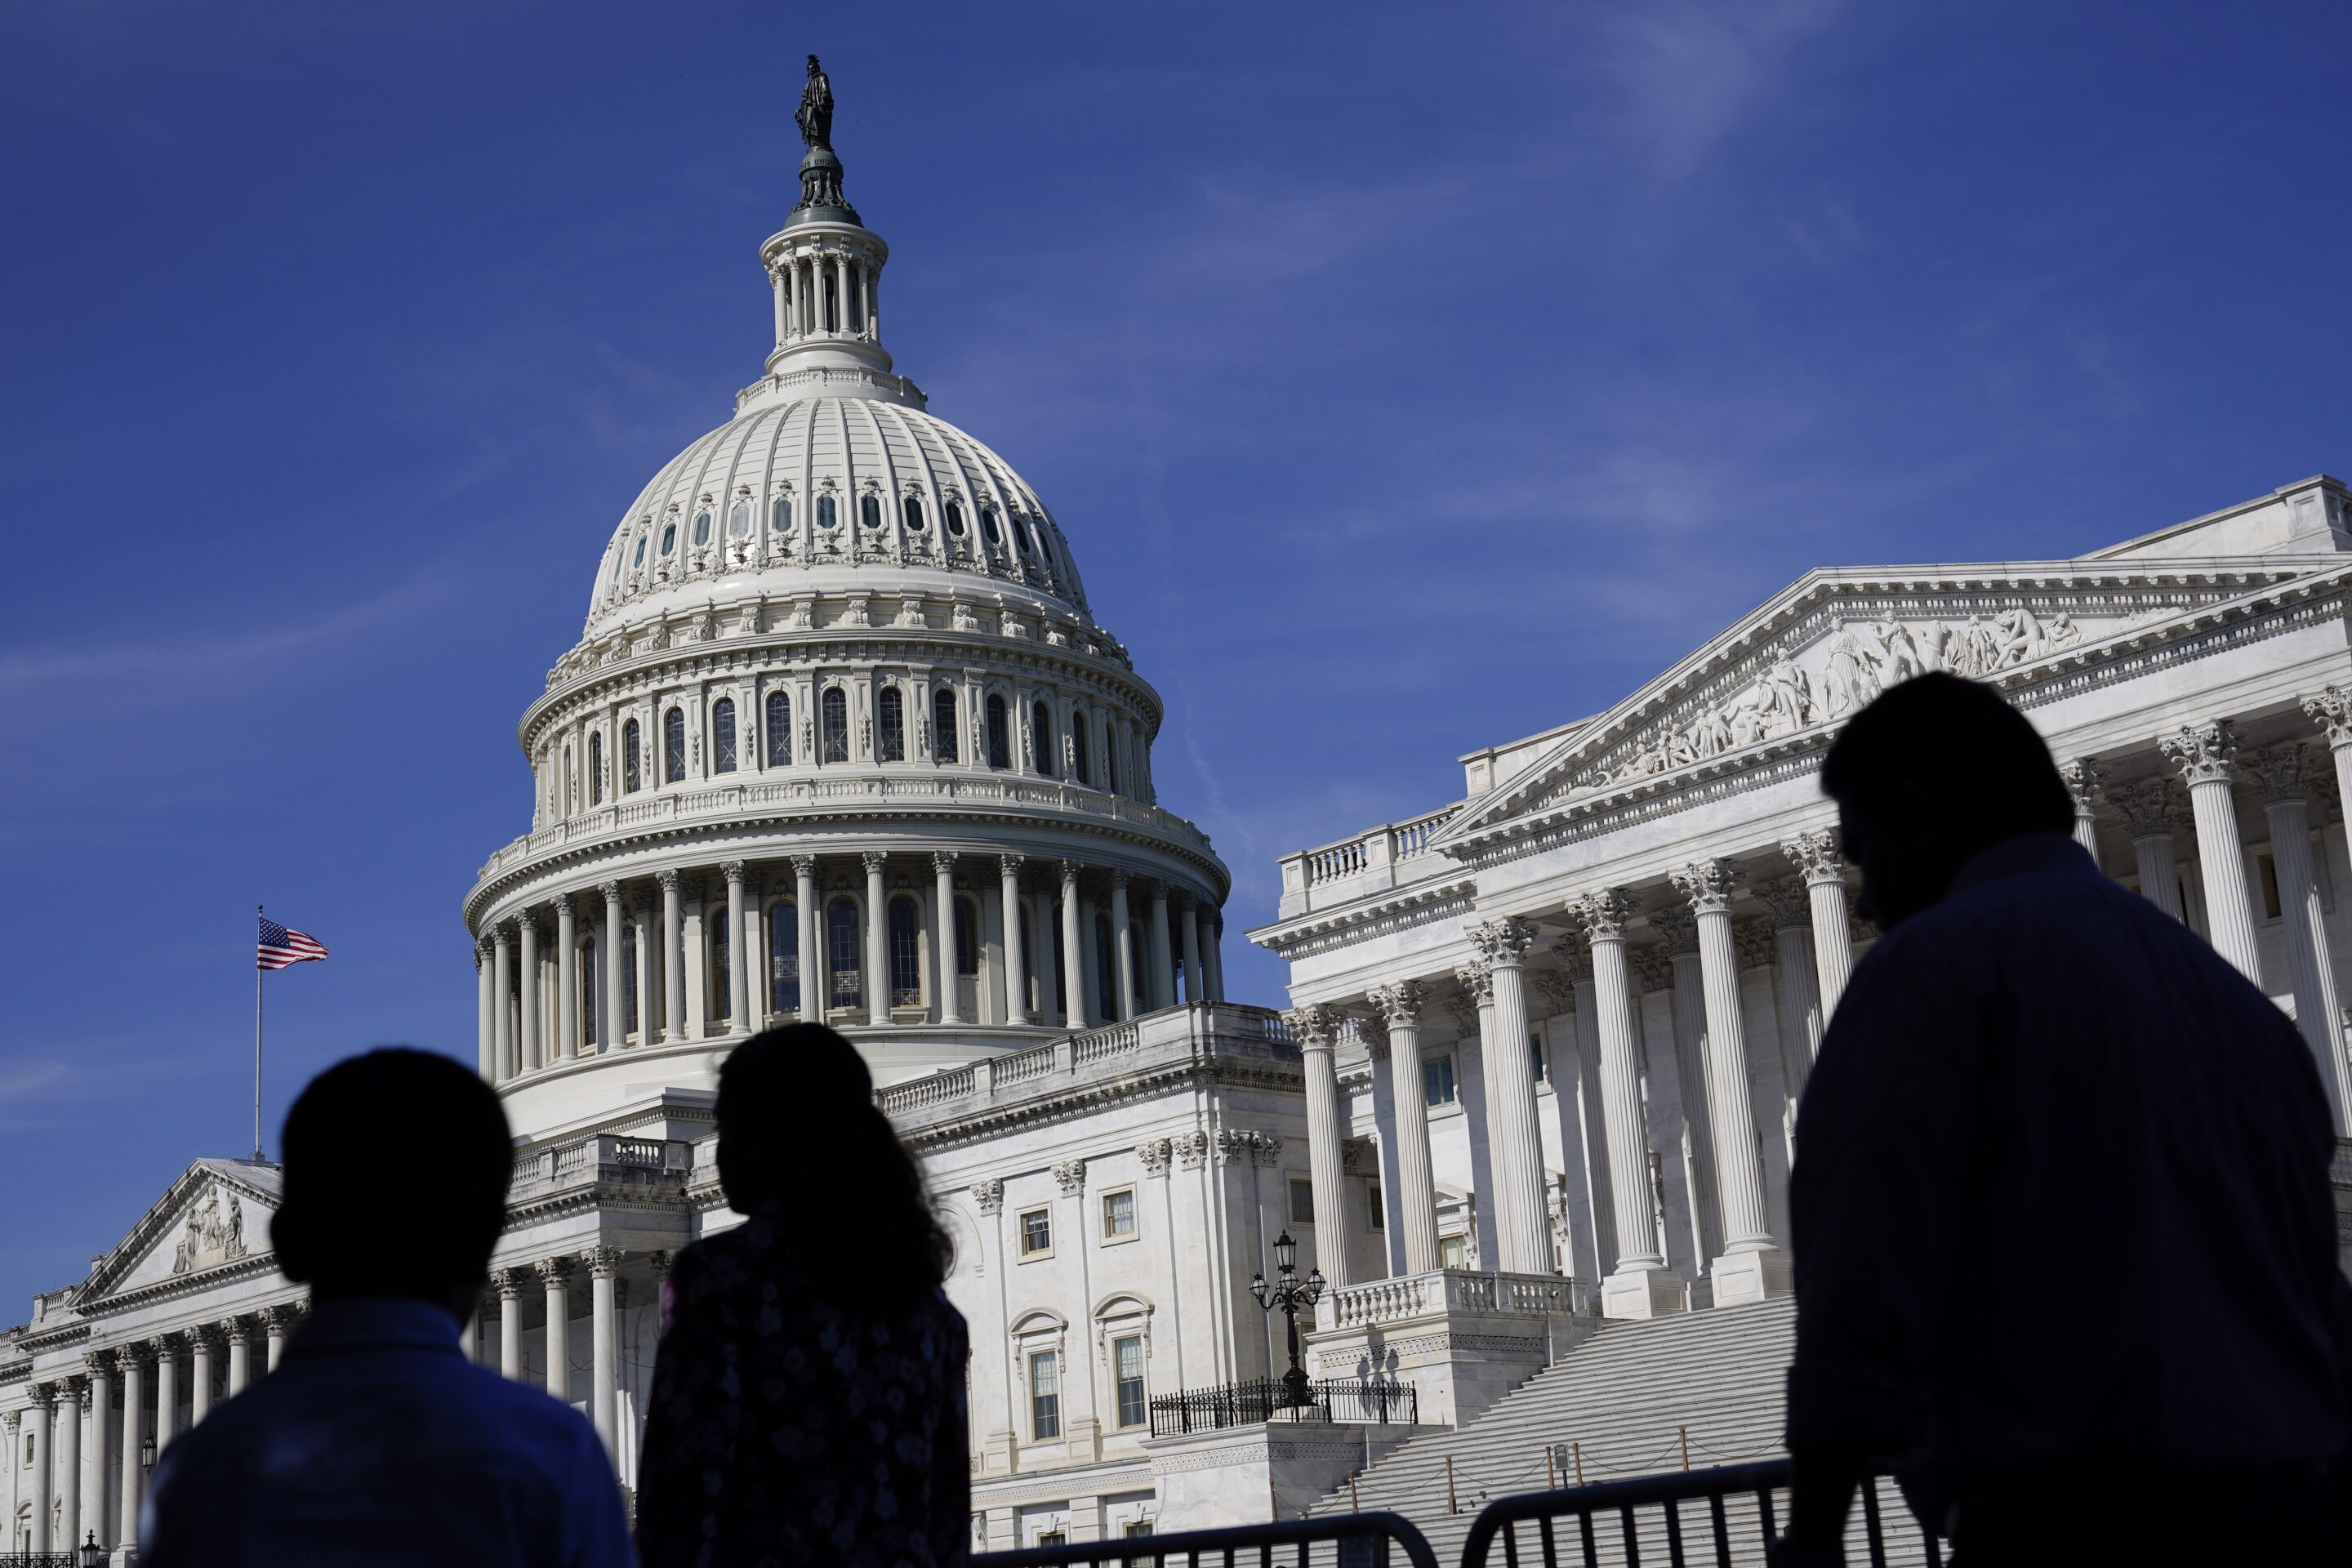 #Health data breach hitting Congress ‘could be extraordinary’